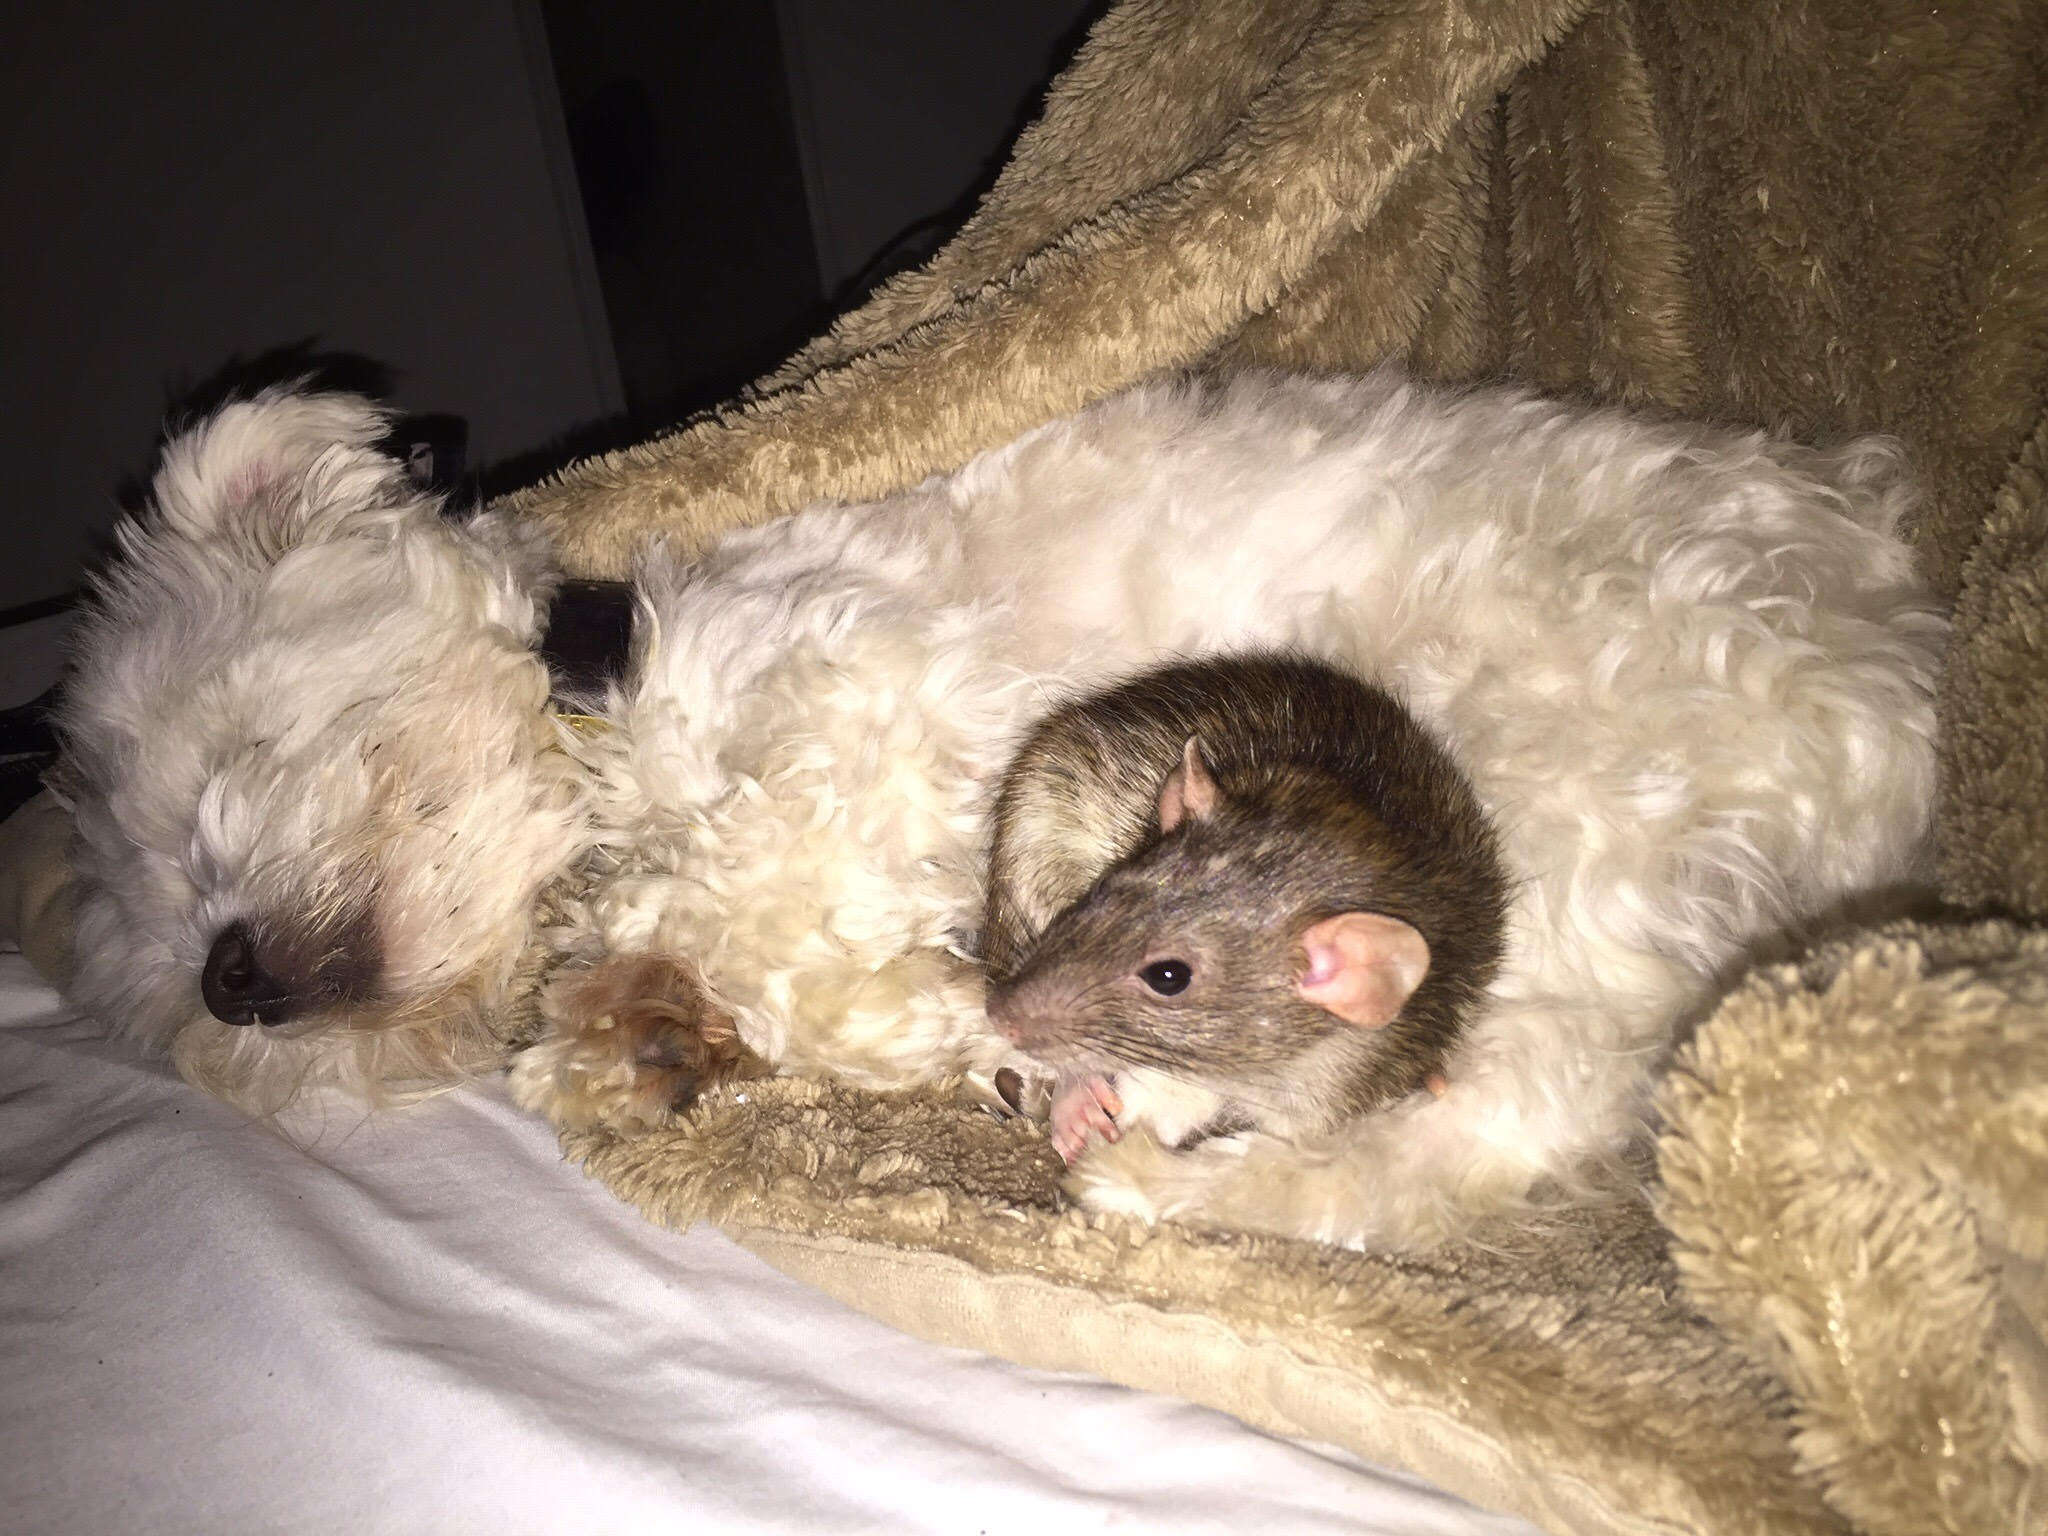 Rat snuggling with dog